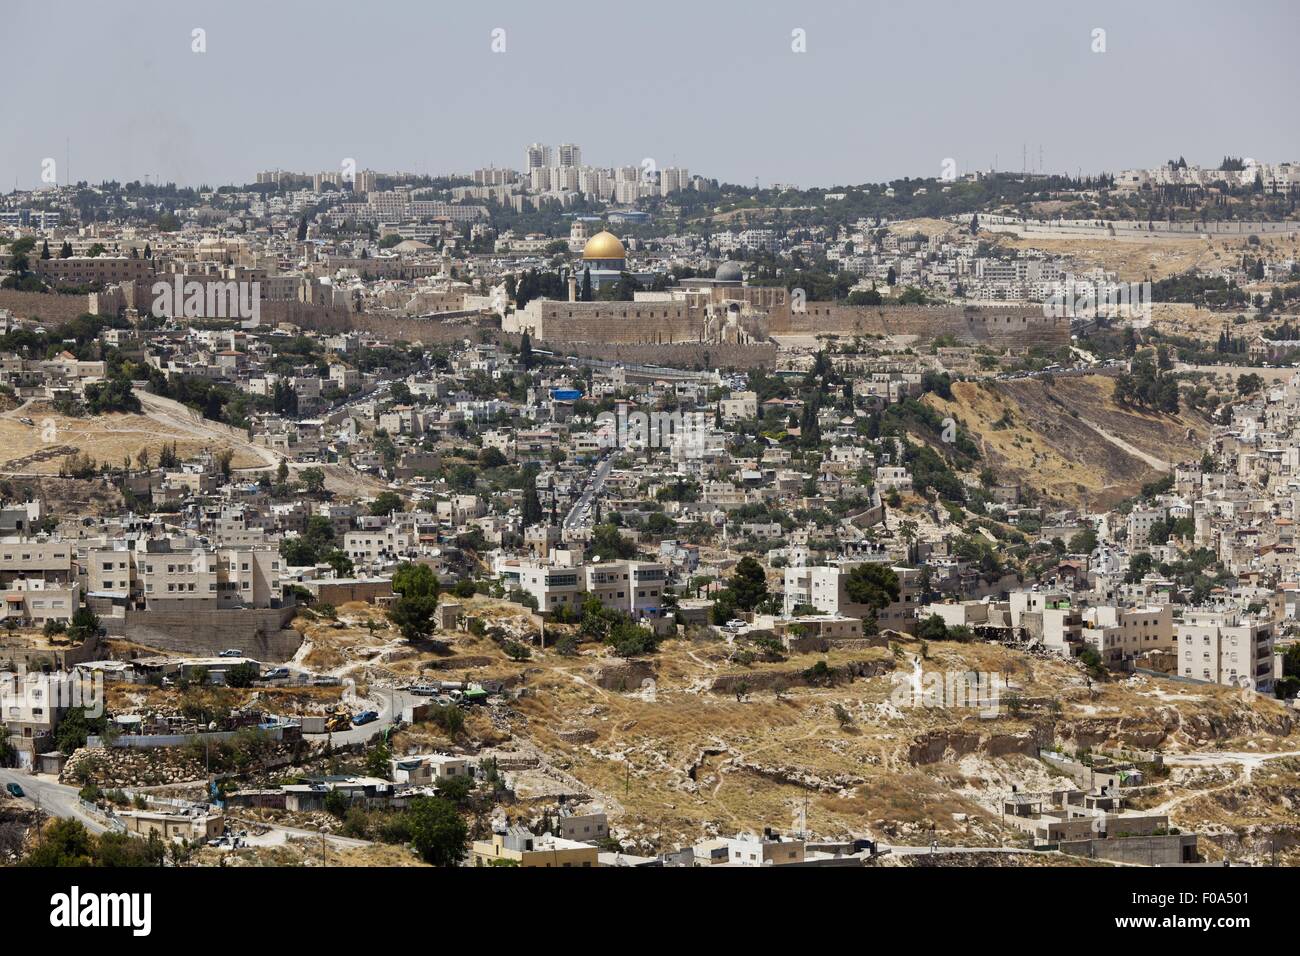 View of cityscape, Temple Mount, Dome of the Rock, and City Wall in Jerusalem, Israel Stock Photo